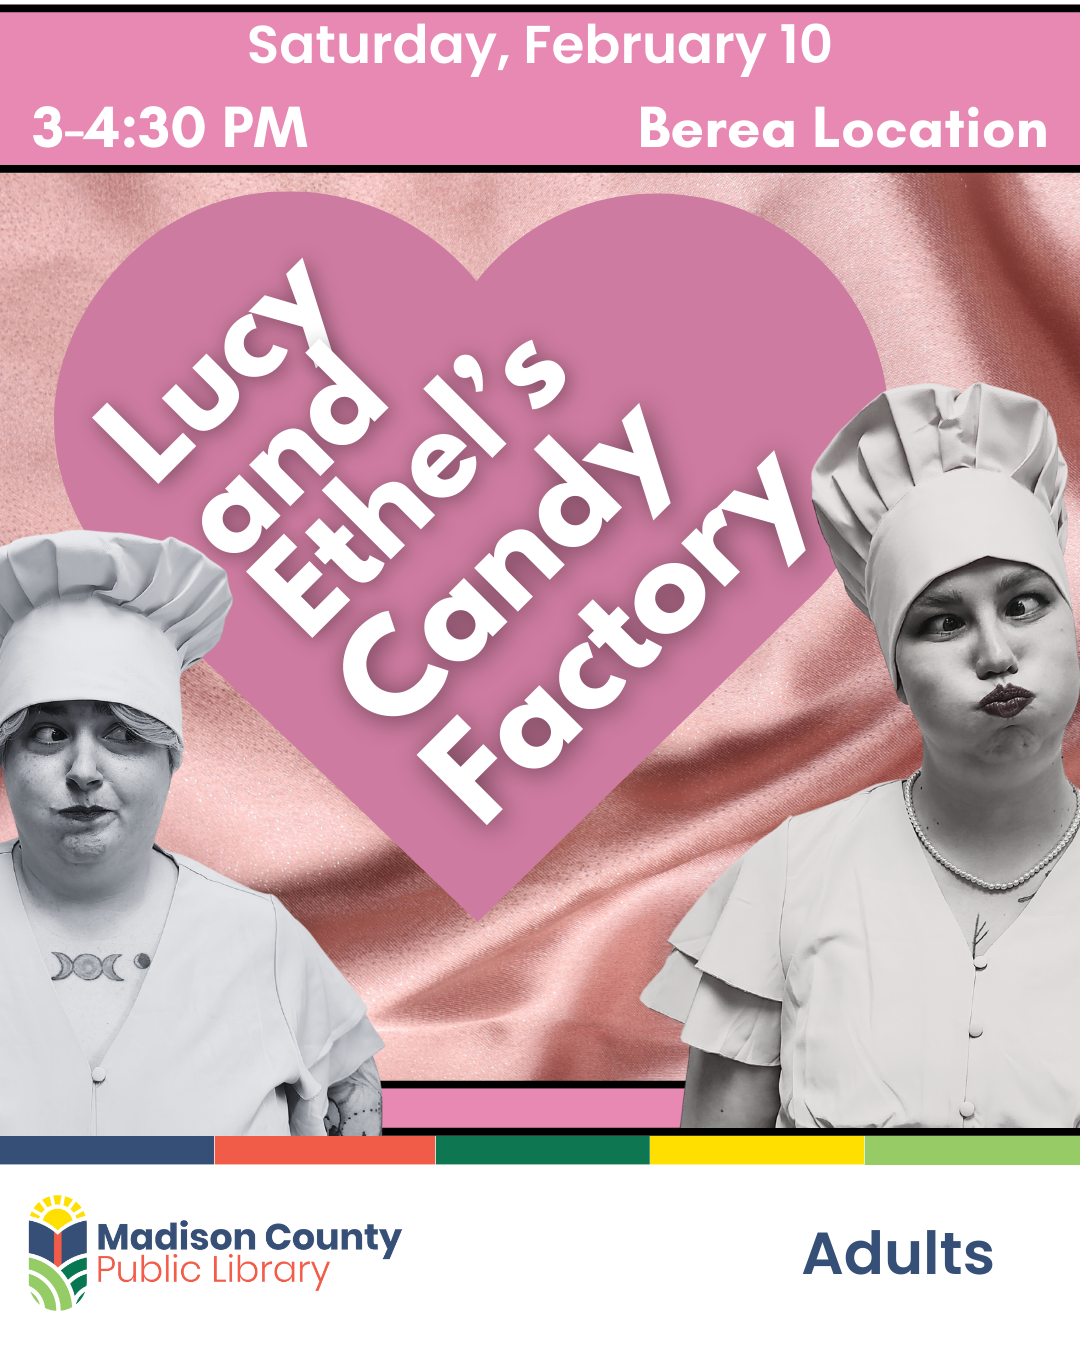 Lucy and Ethel's Candy Factory